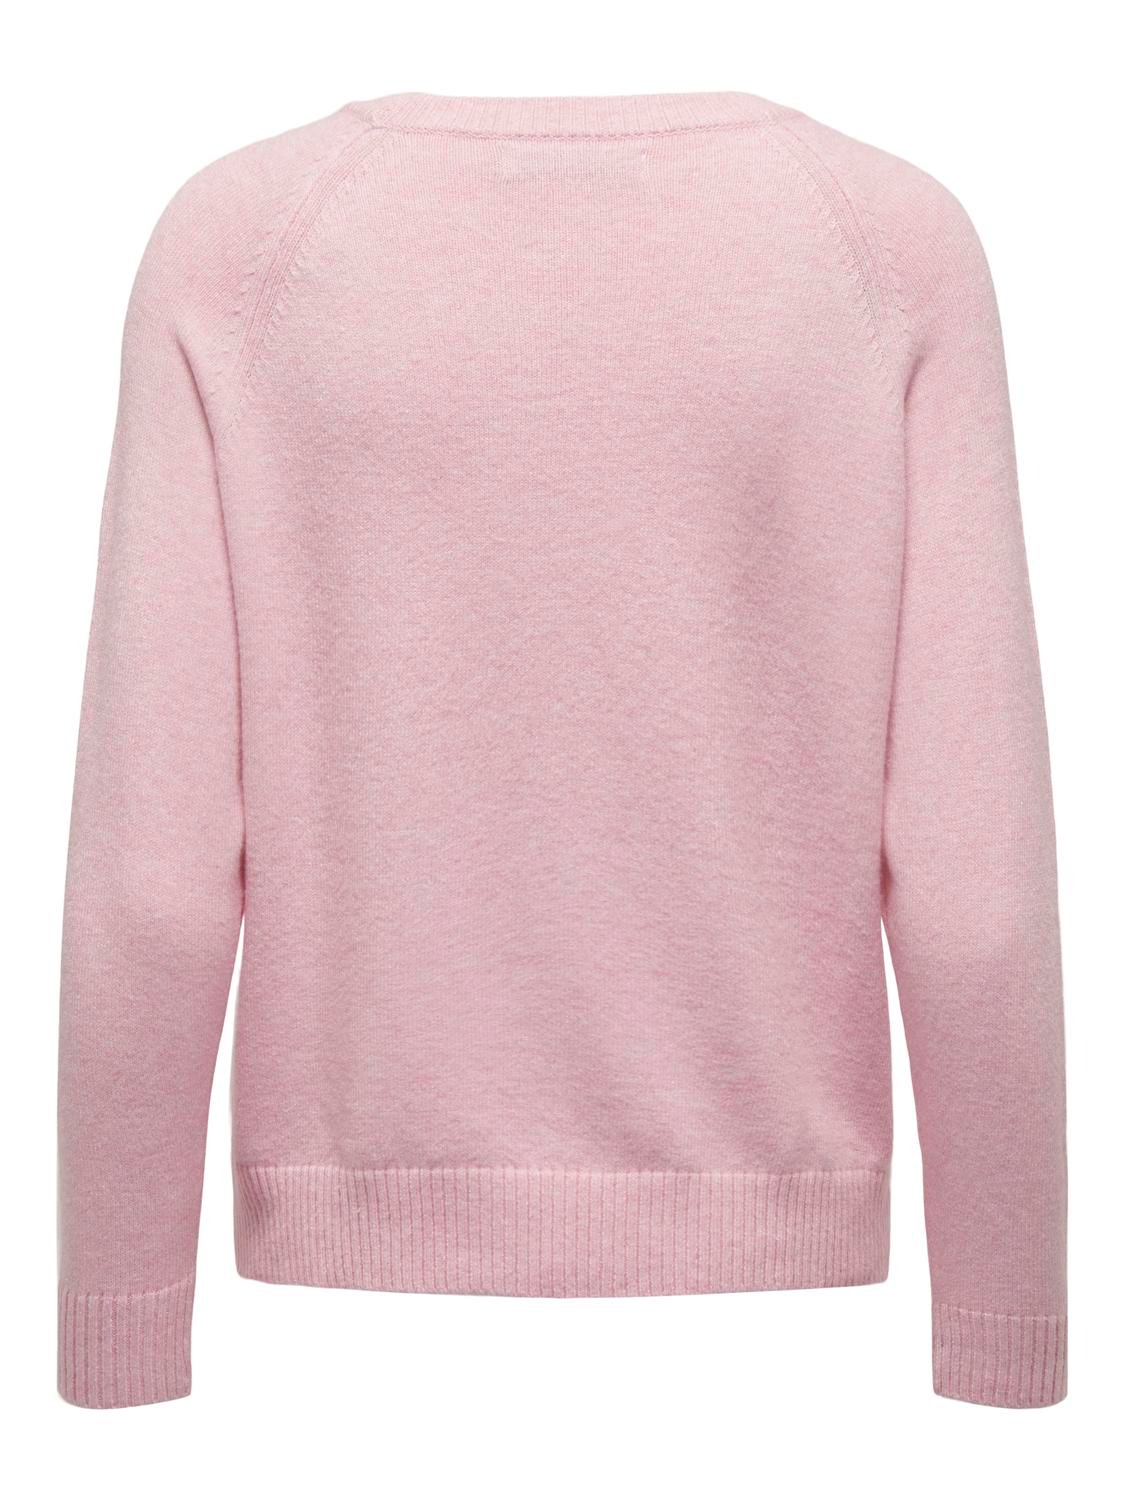 ONLY Solid colored Knitted Pullover -Light Pink - 15170427